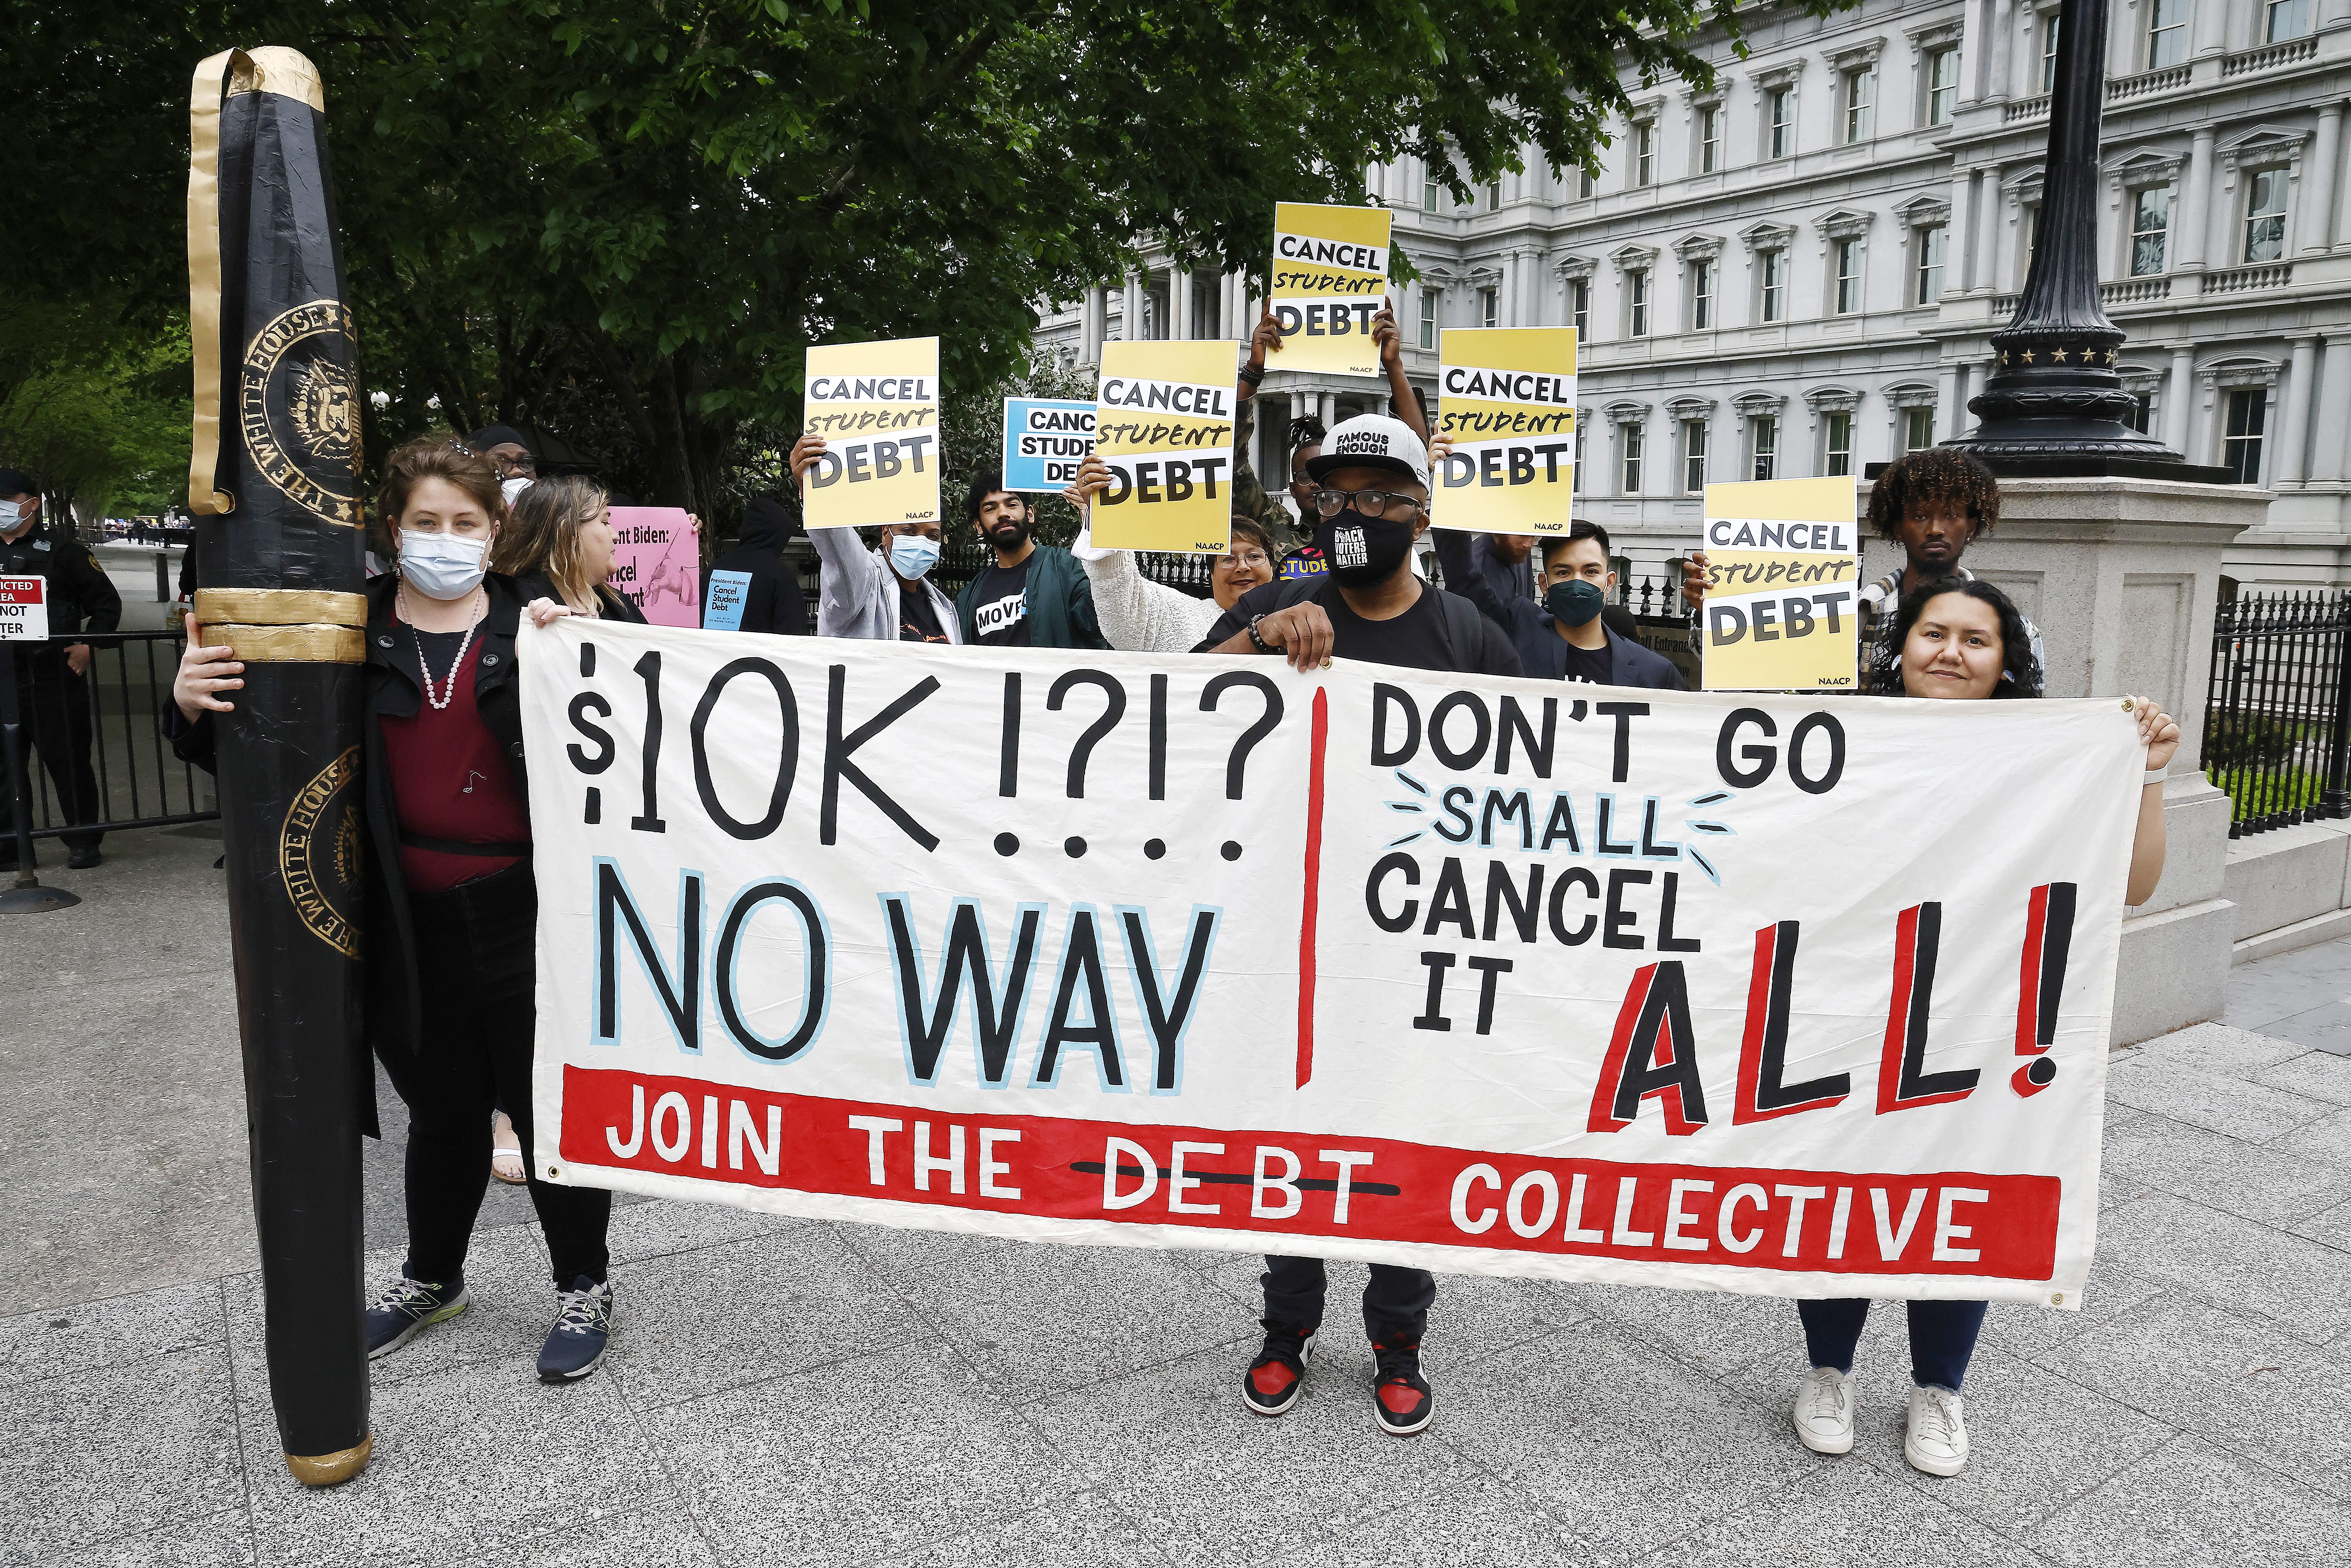 People gather near the White House to tell President Joe Biden to cancel student loan debt on May 12, 2020 in Washington, D.C.